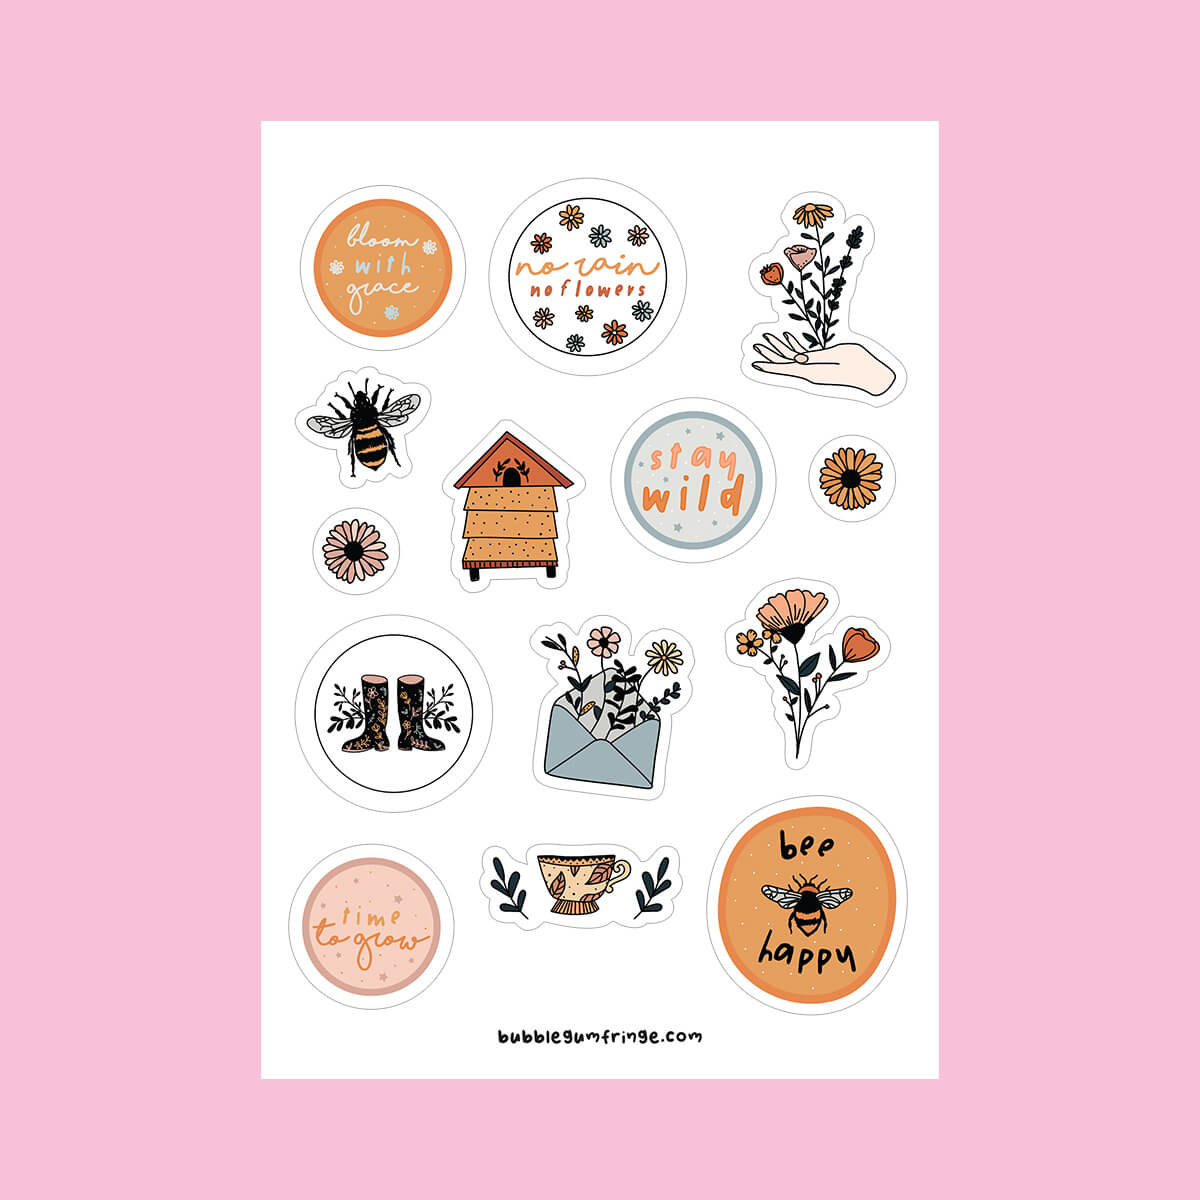 flowers and bees illustration sticker sheet